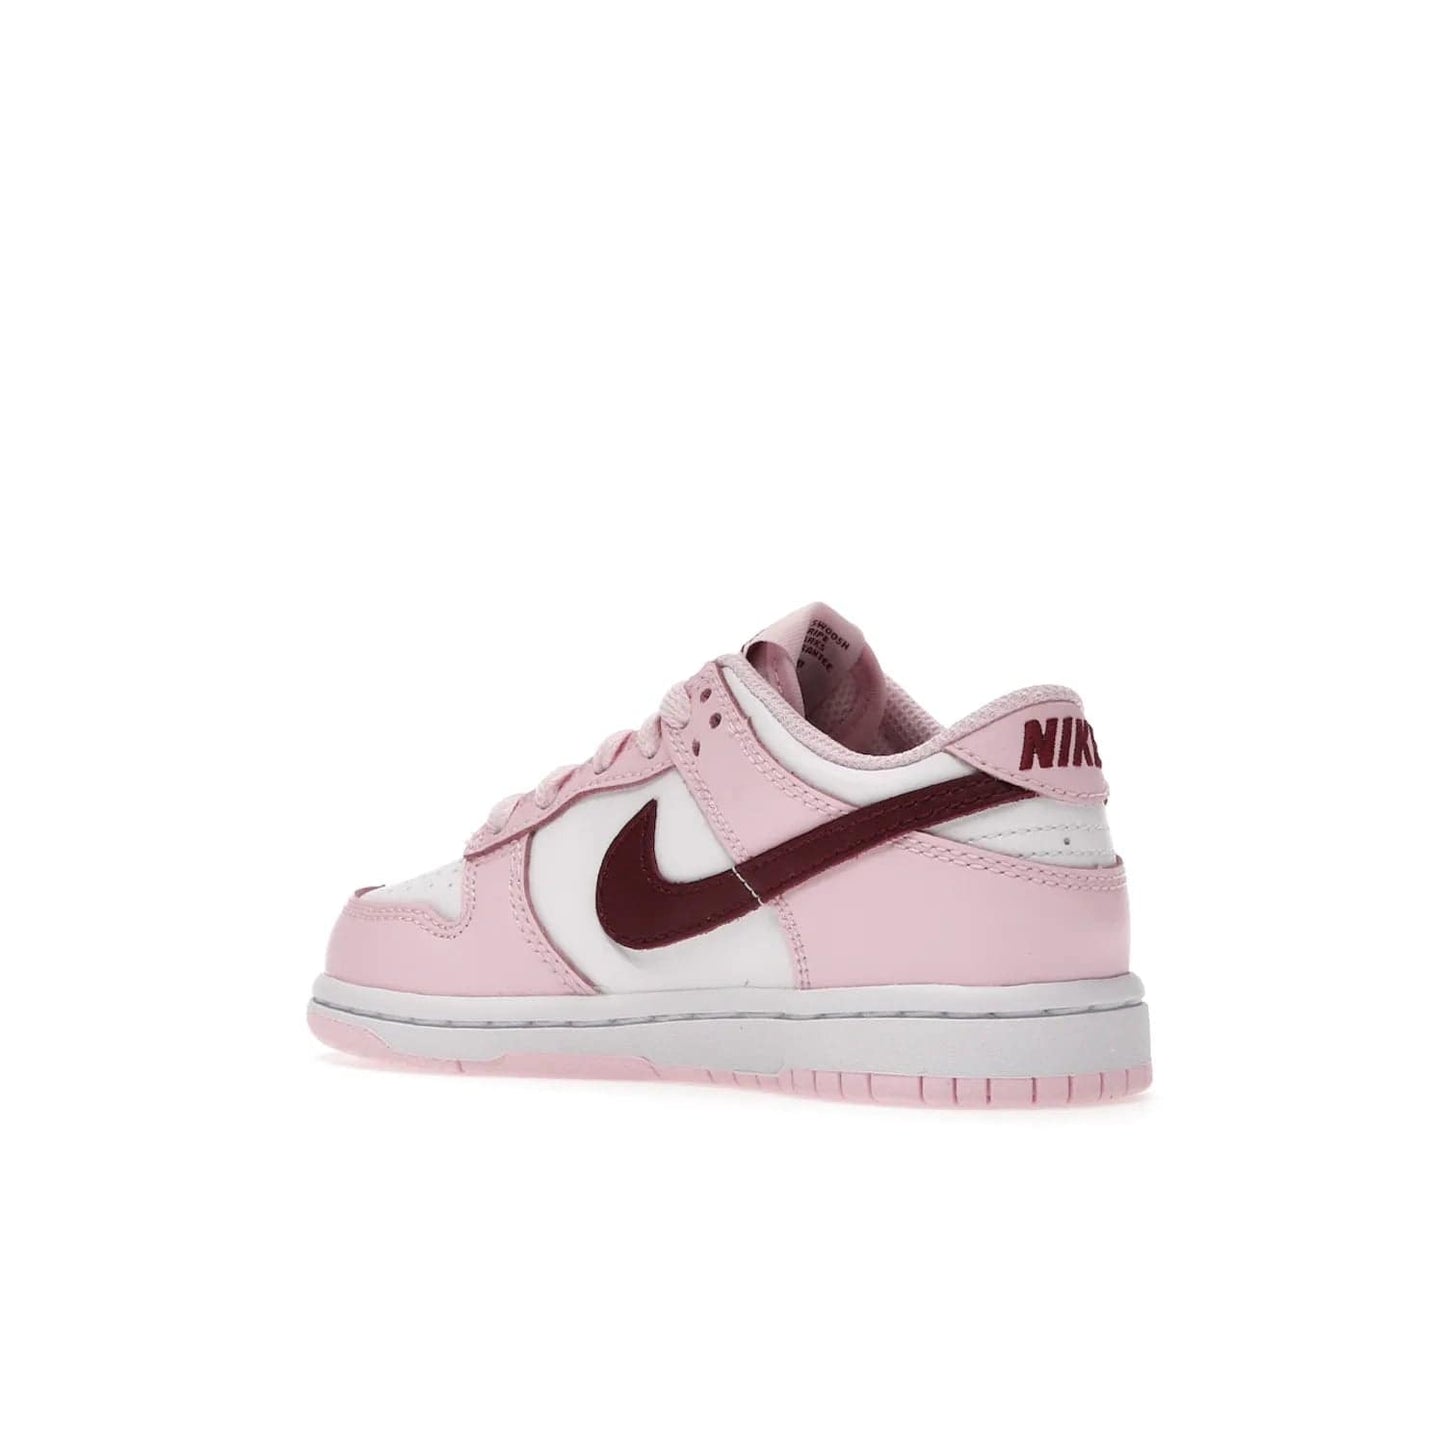 Nike Dunk Low Pink Red White (PS) - Image 23 - Only at www.BallersClubKickz.com - Introducing the Nike Dunk Low Pink Red White (PS), the perfect addition to your sneaker collection. A classic silhouette with modern vibrant colors, including a pink upper with red and white accents and a white midsole. Comfort and durability, perfect for any outfit. Limited edition, available June 22nd.